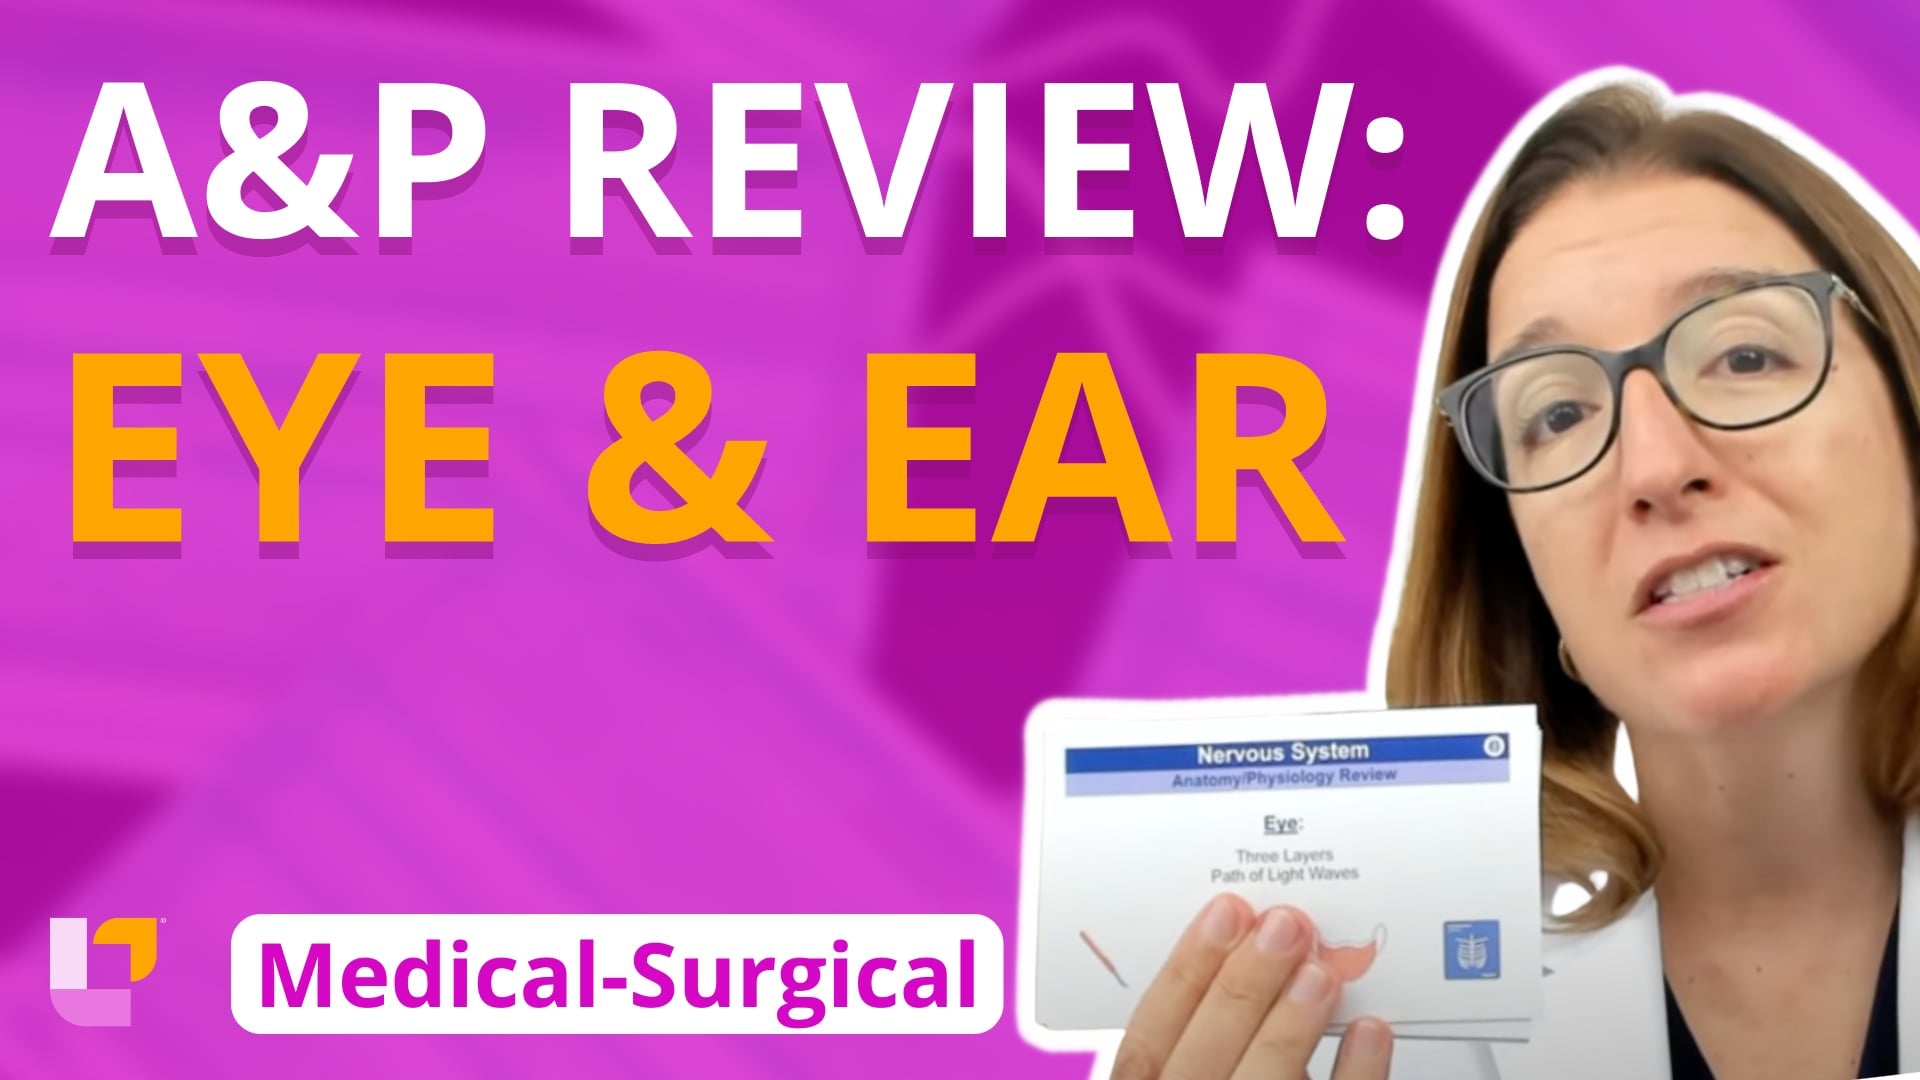 Med-Surg - Nervous System, part 4: A&P Review - Eye and Ear - LevelUpRN